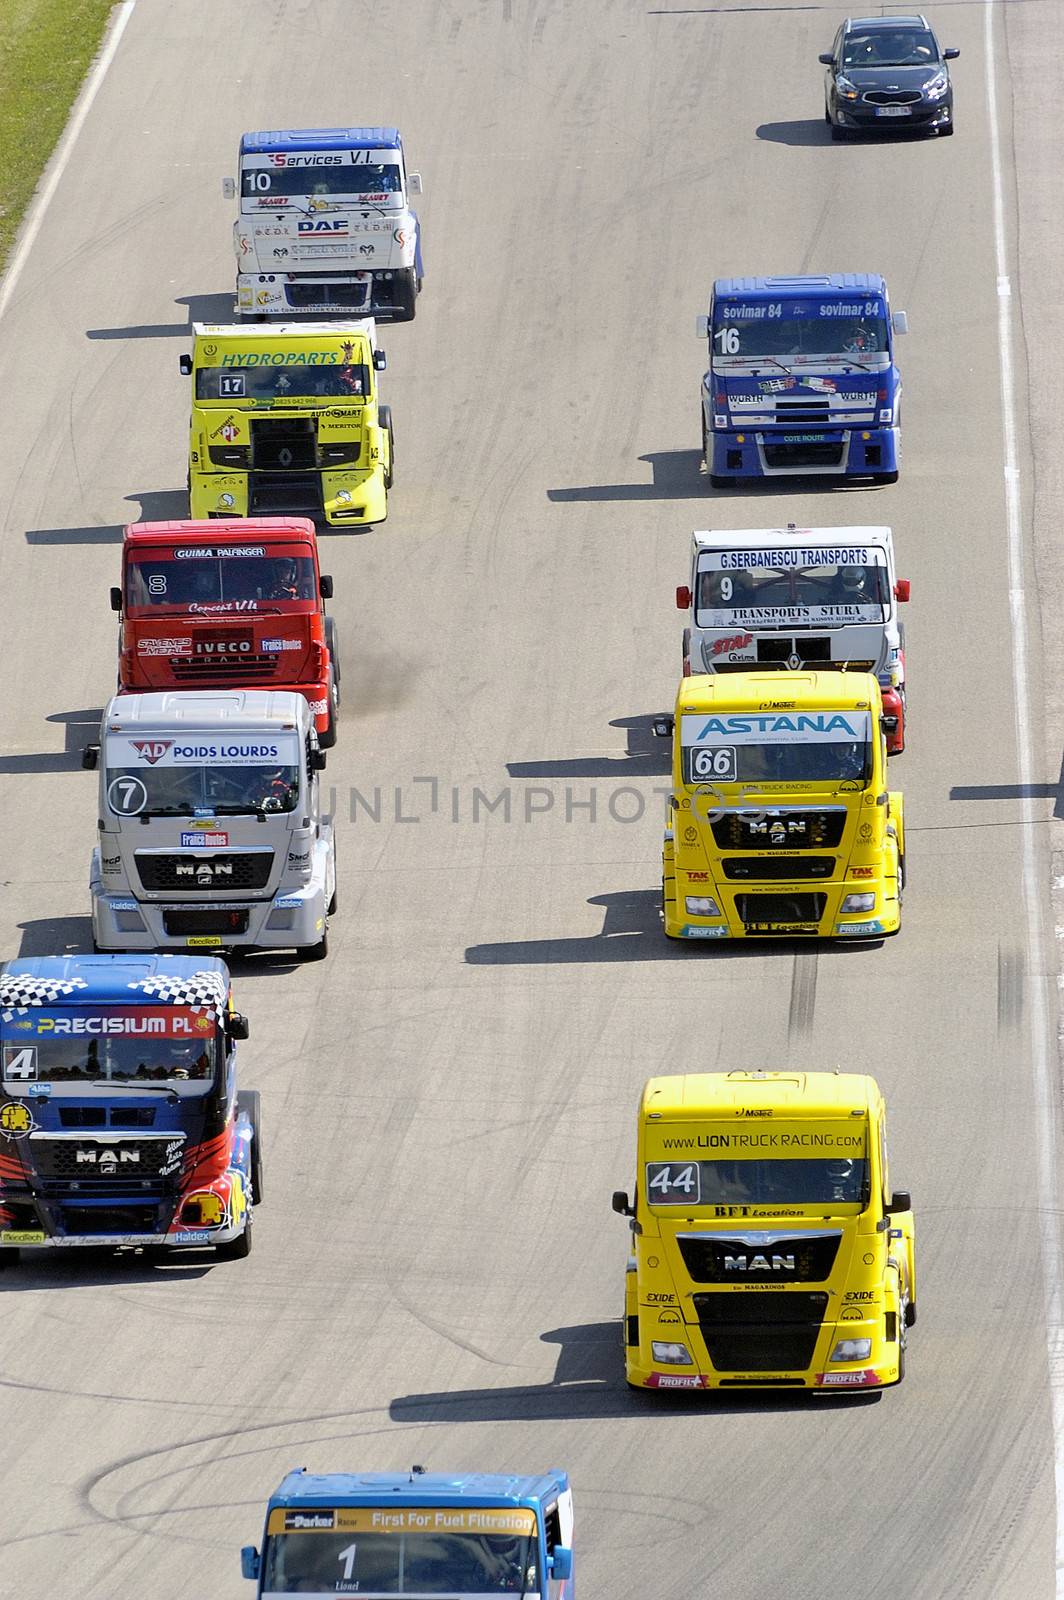 Ales - France - Grand Prix of France trucks May 25th and 26th, 2013 on the circuit of the Cevennes.